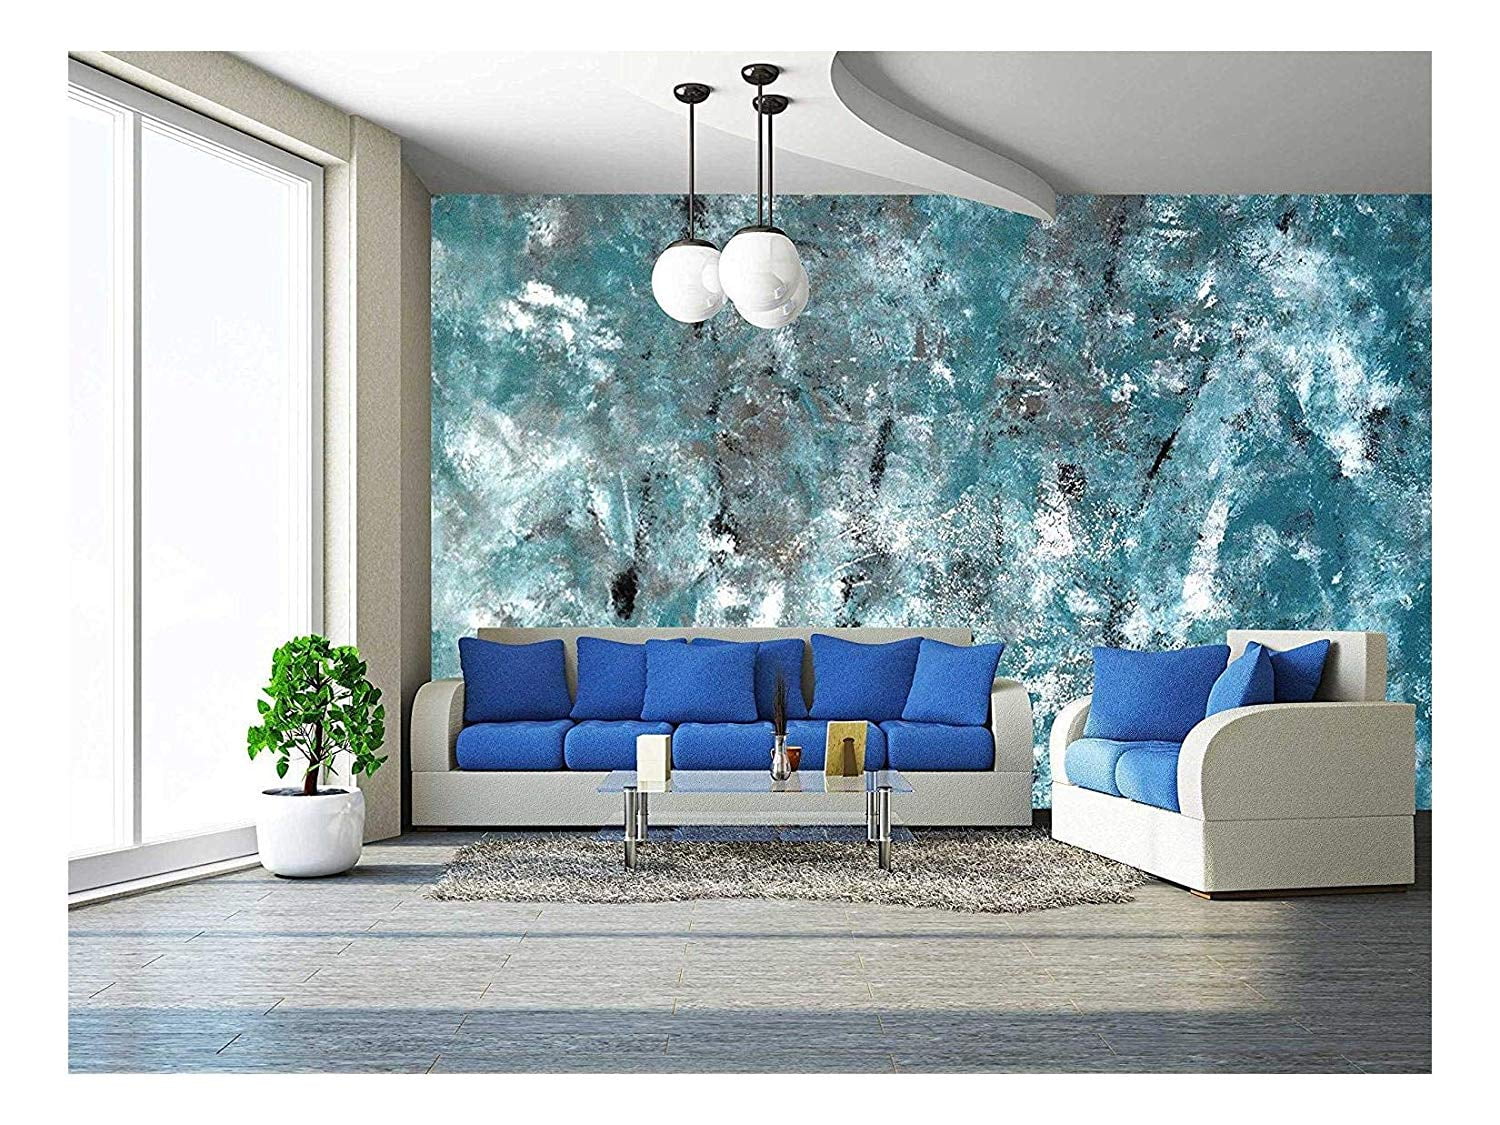 Wall26 Teal and Grey Abstract Art Painting - Removable Wall Mural